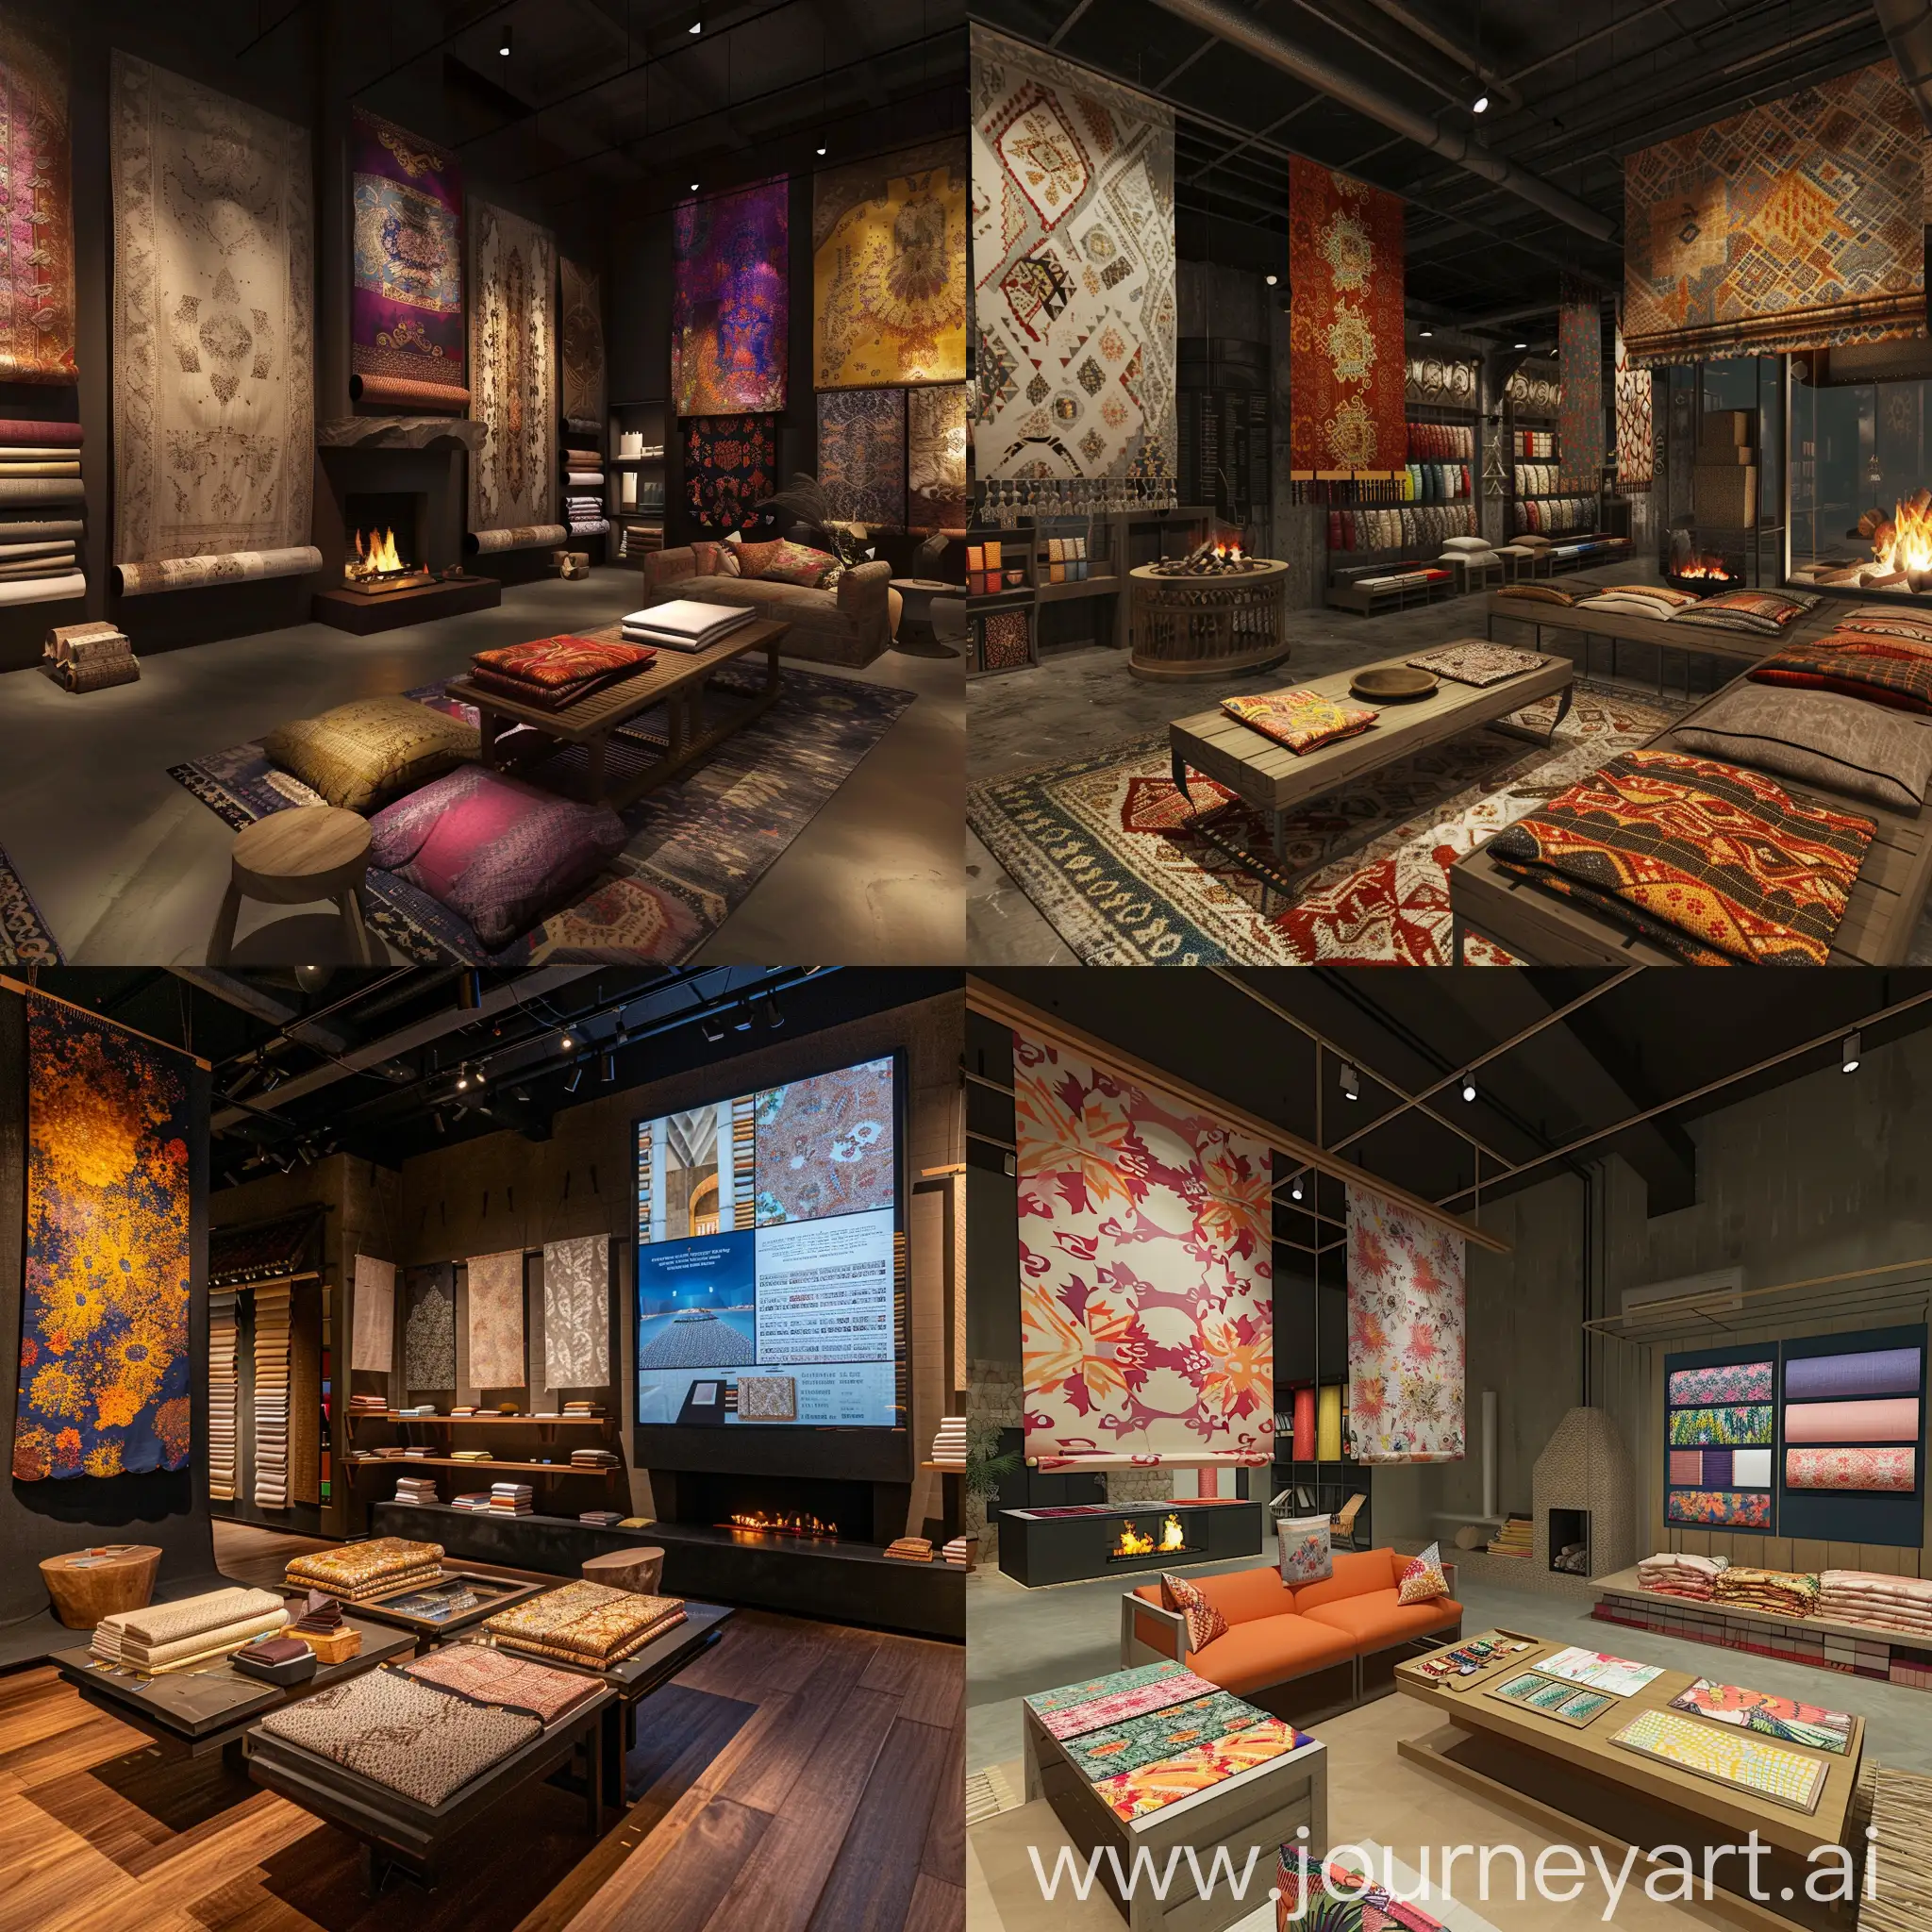 Modern-IndonesianInspired-Fabric-Showroom-Interior-with-Hang-Display-Seating-Area-and-Virtual-Fabric-Visualization-Screen